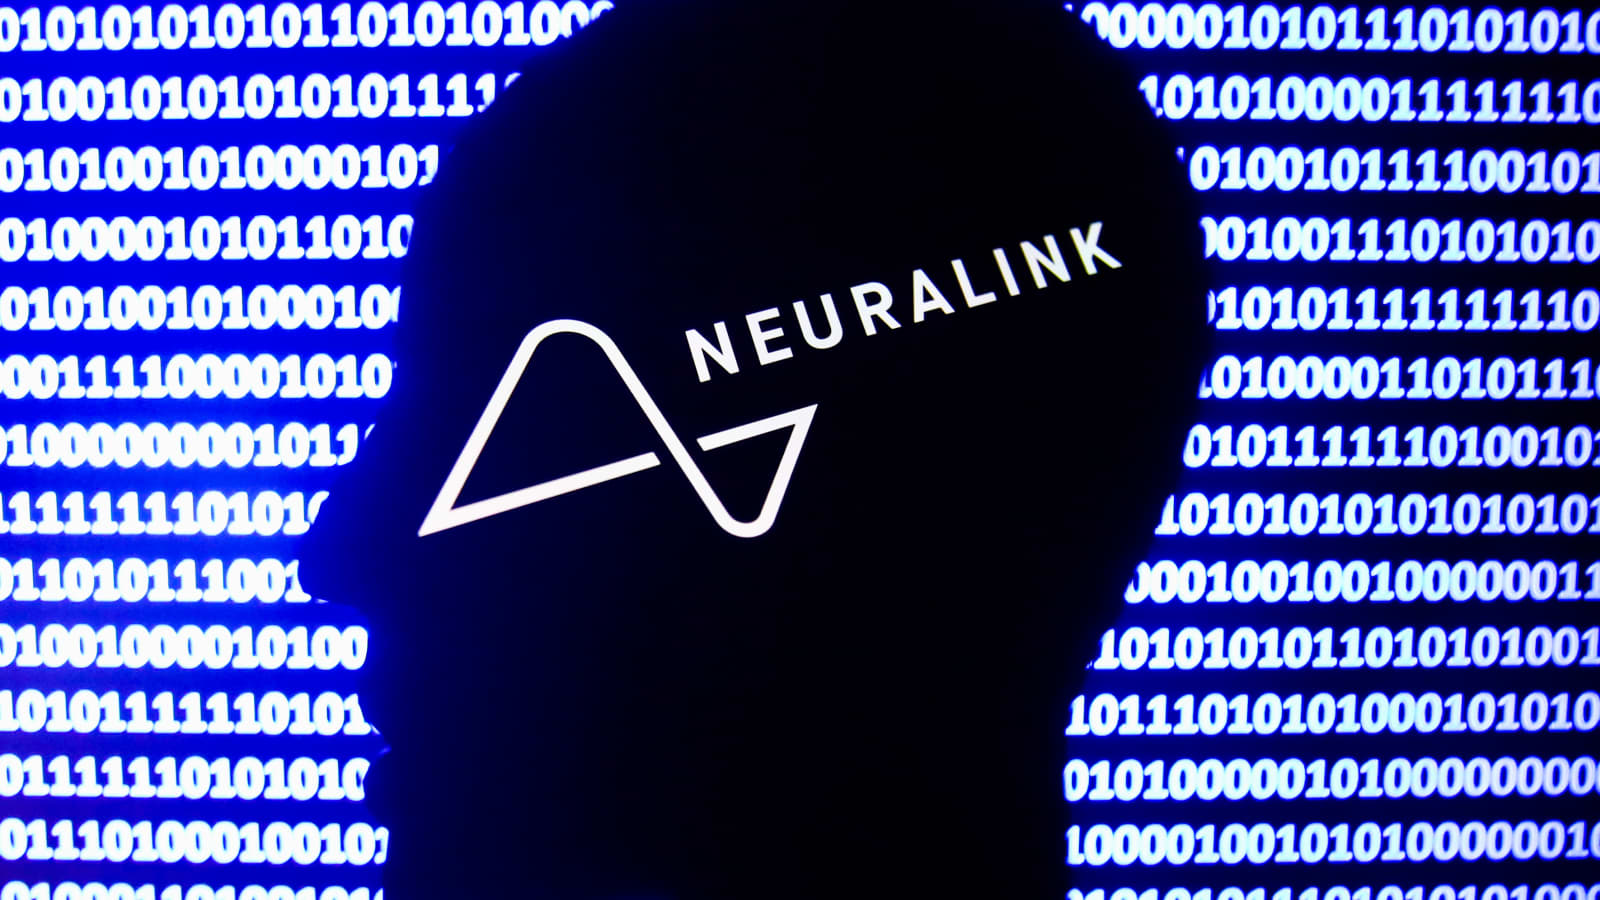 FDA inspectors find record-keeping lapses and quality control issues at Neuralink (Credits: CNBC)